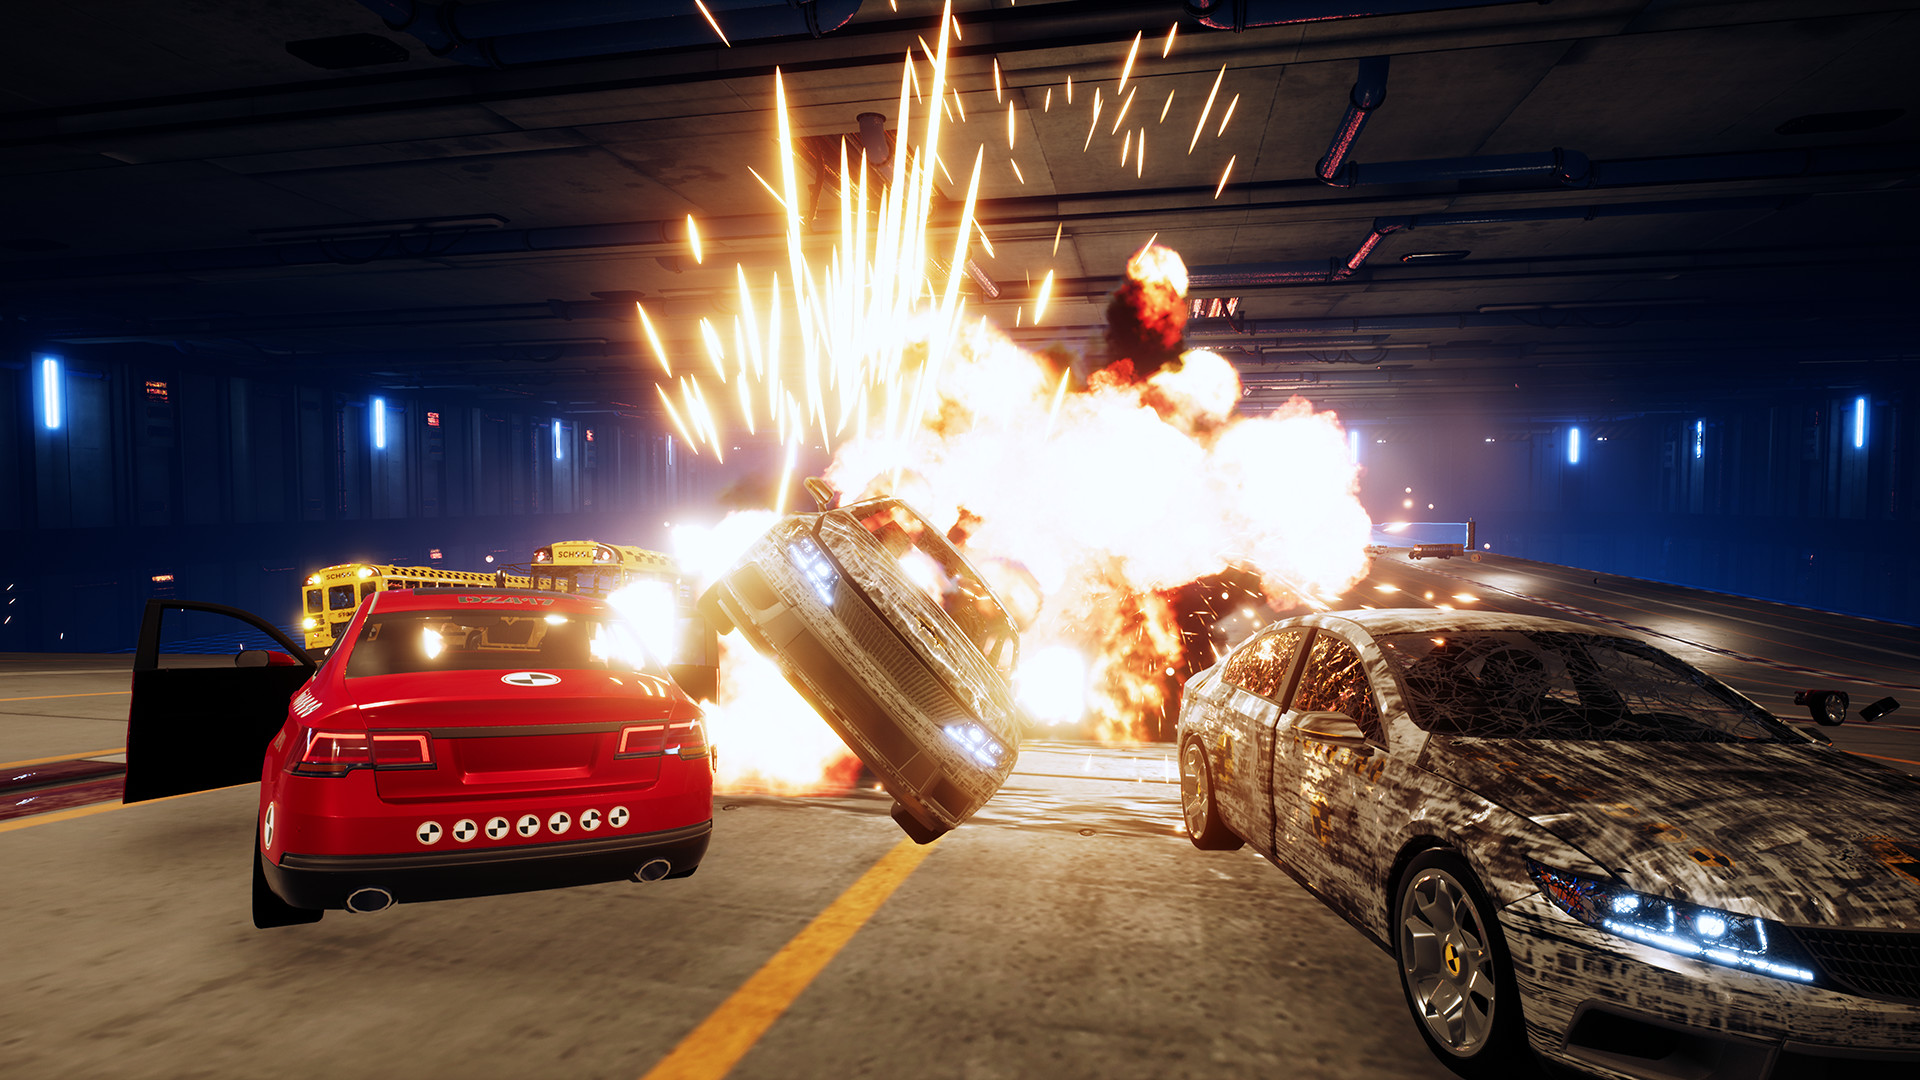 Danger Zone Game features the biggest and best car crashes